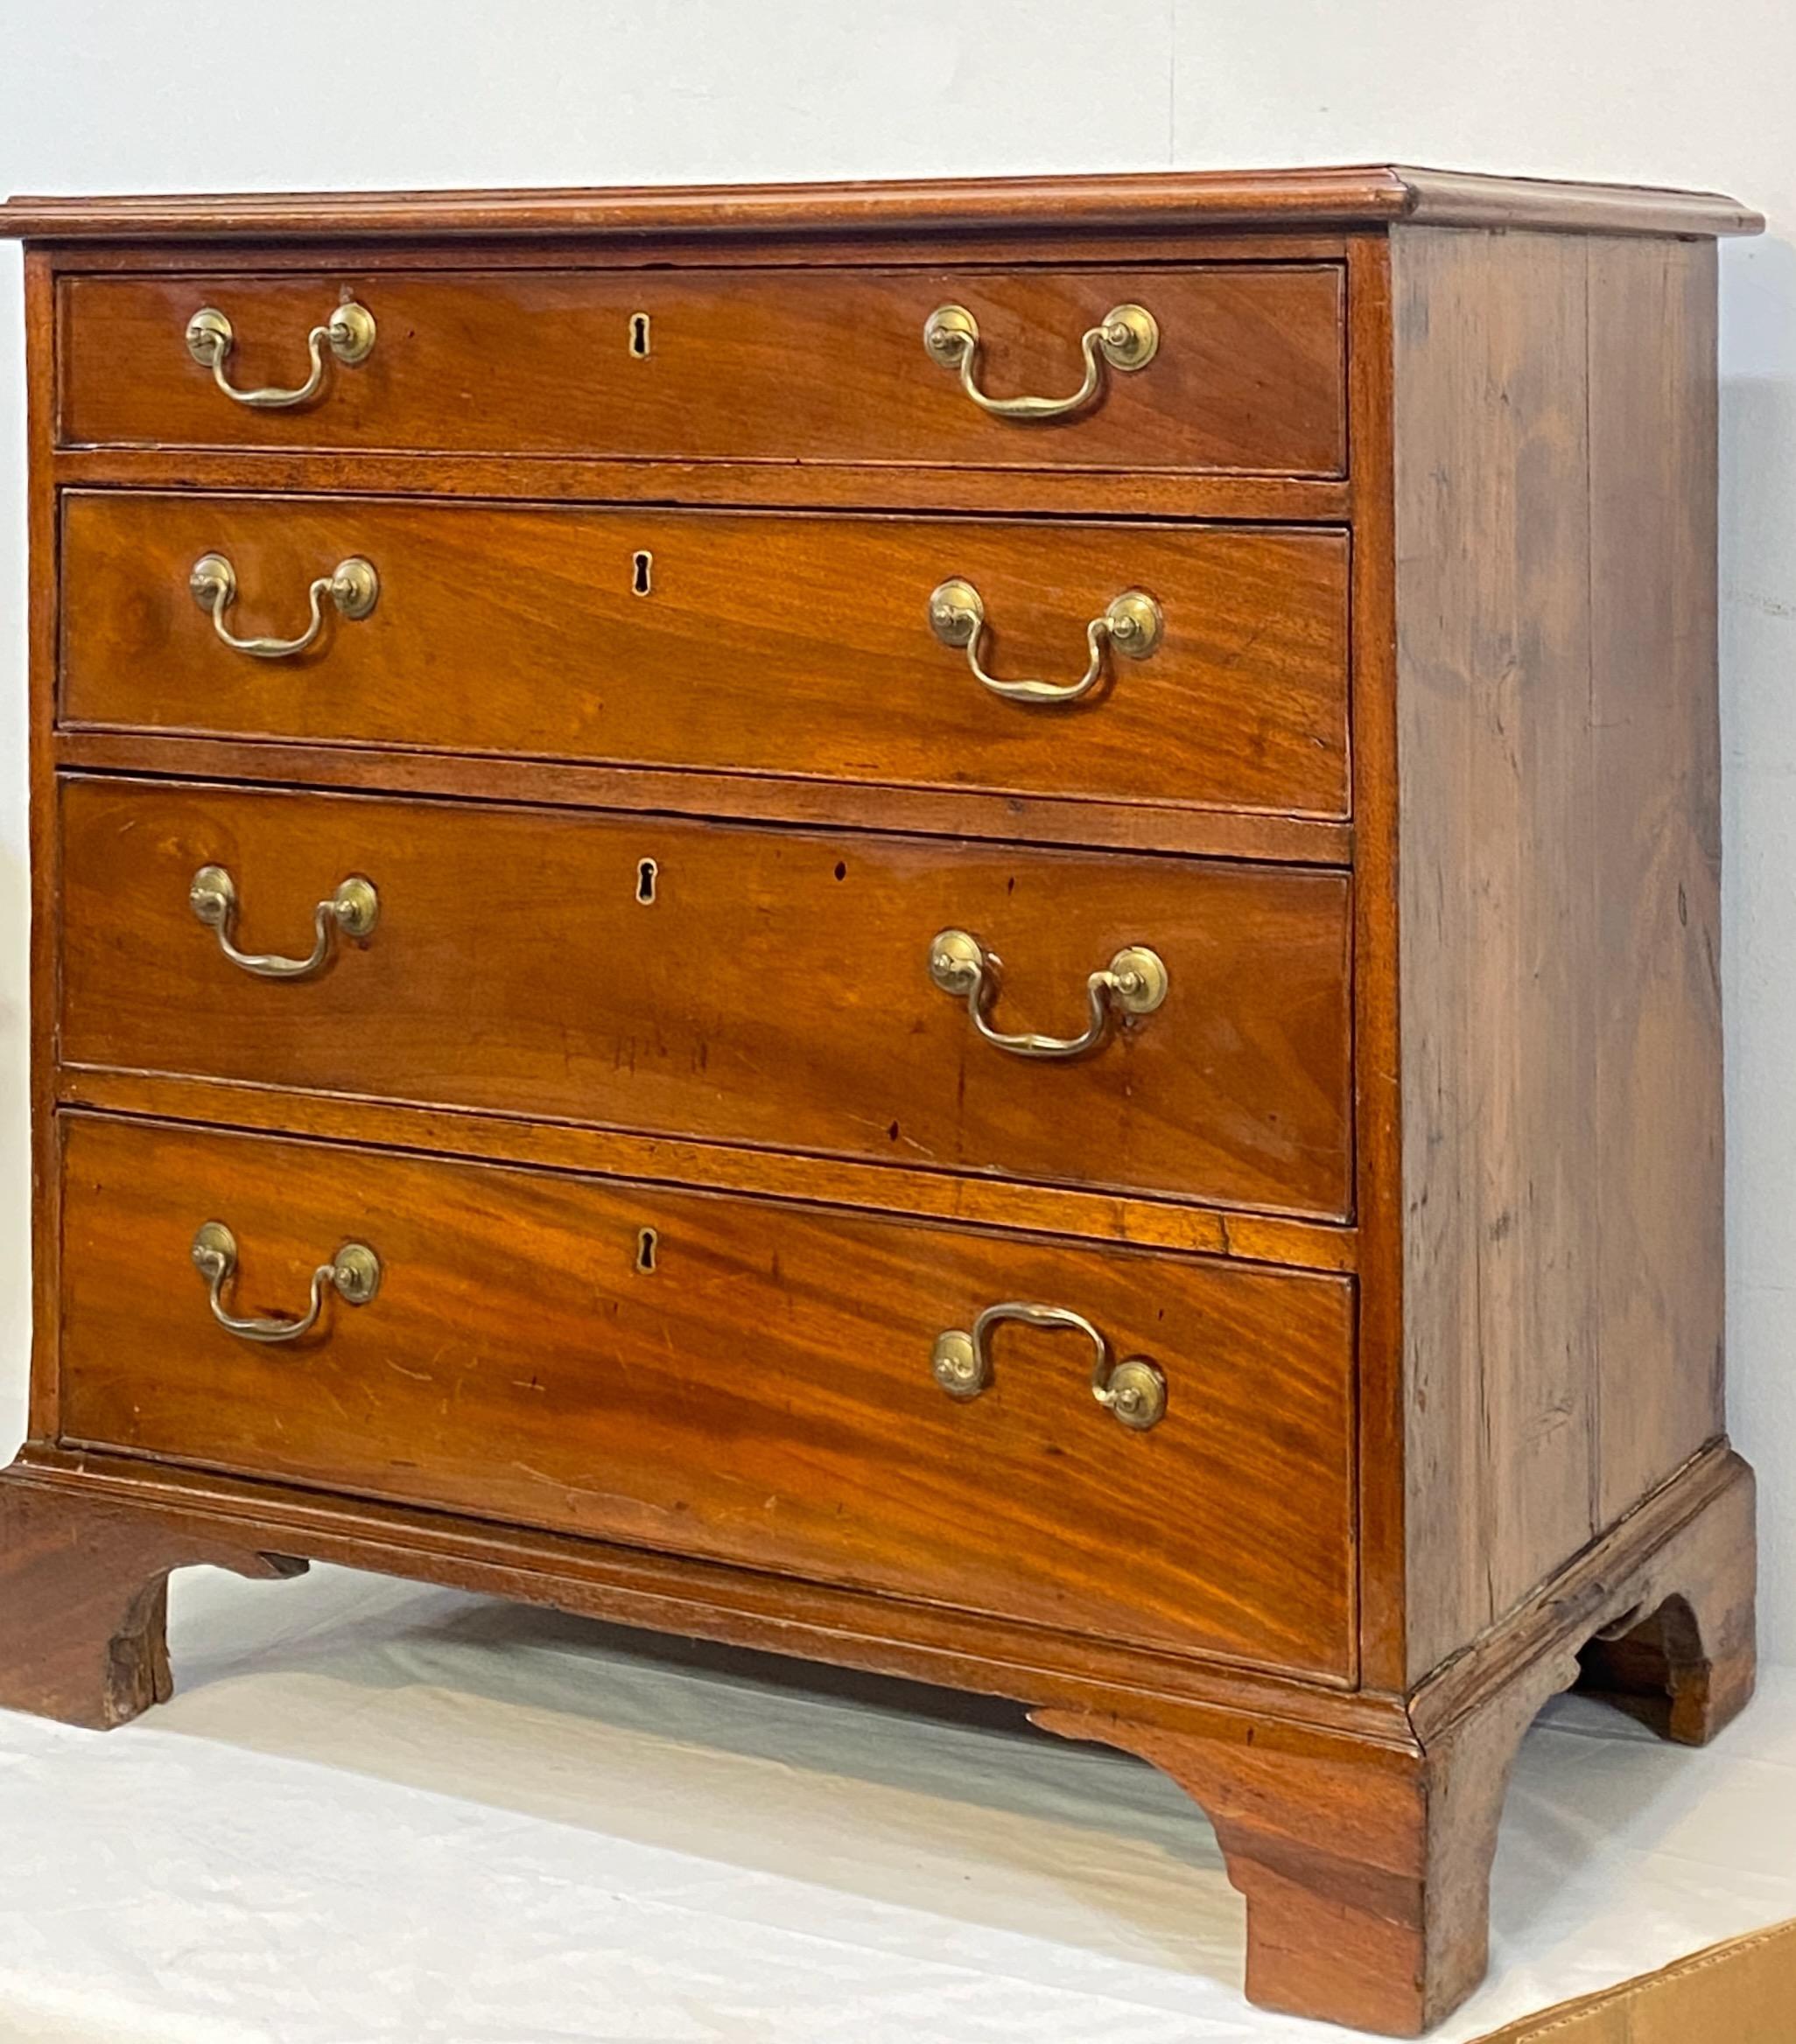 Unusual and desirable modest size mahogany chest of drawers with original brass hardware.
Most likely from the North East of United States.
Selling this just as we found it, we have only cleaned and oiled. There is some light scratches and